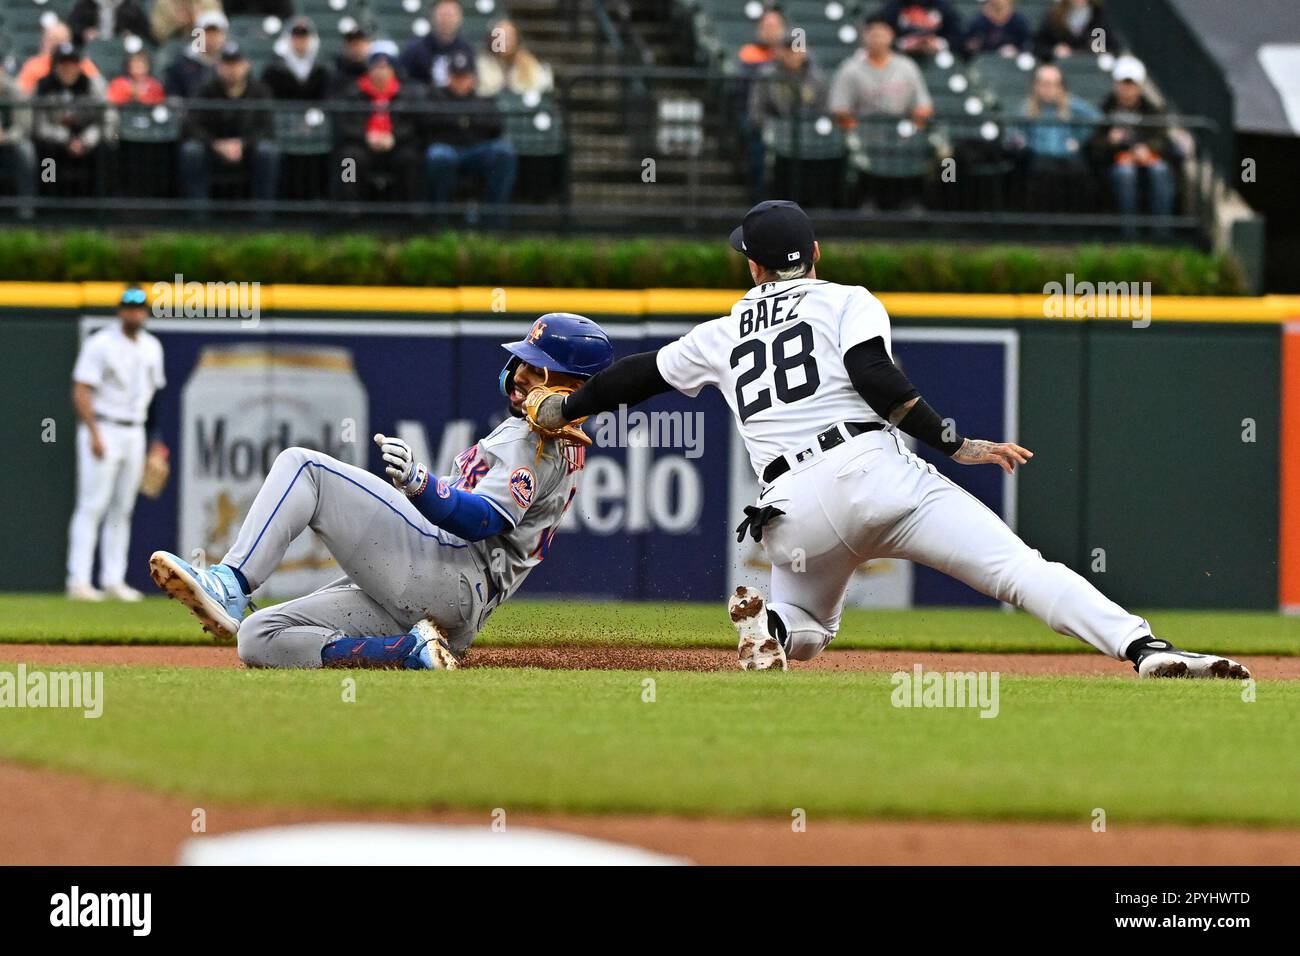 DETROIT, MI - MAY 03: Detroit Tigers shortstop Javier Baez (28) applies the  tag as New York Mets shortstop Francisco Lindor (12) tried to stretch a  single into a double during the